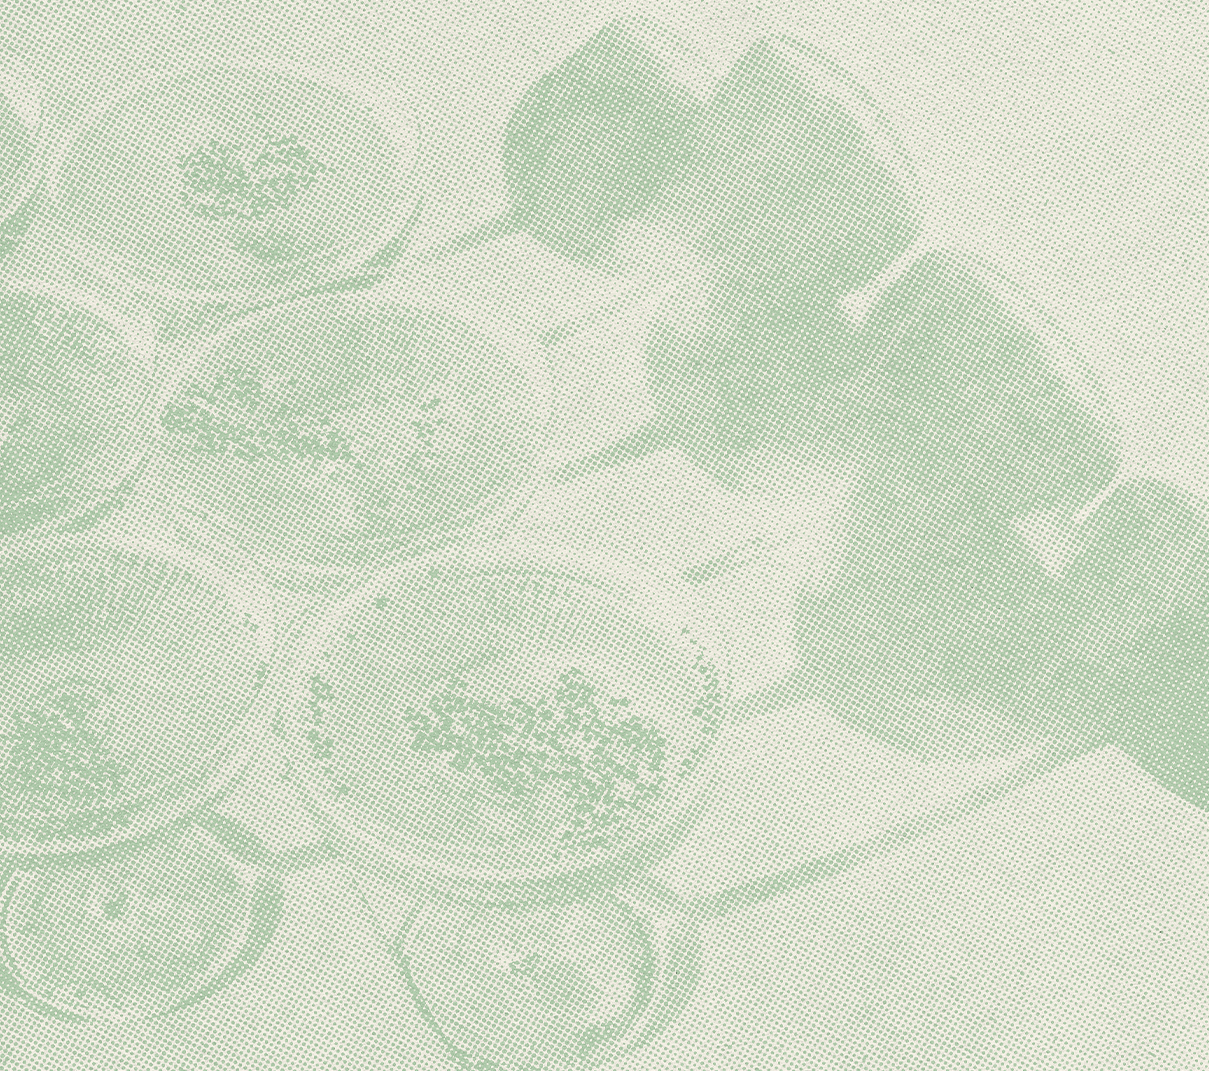 Halftone image of cocktails and their shadows in mint and cream